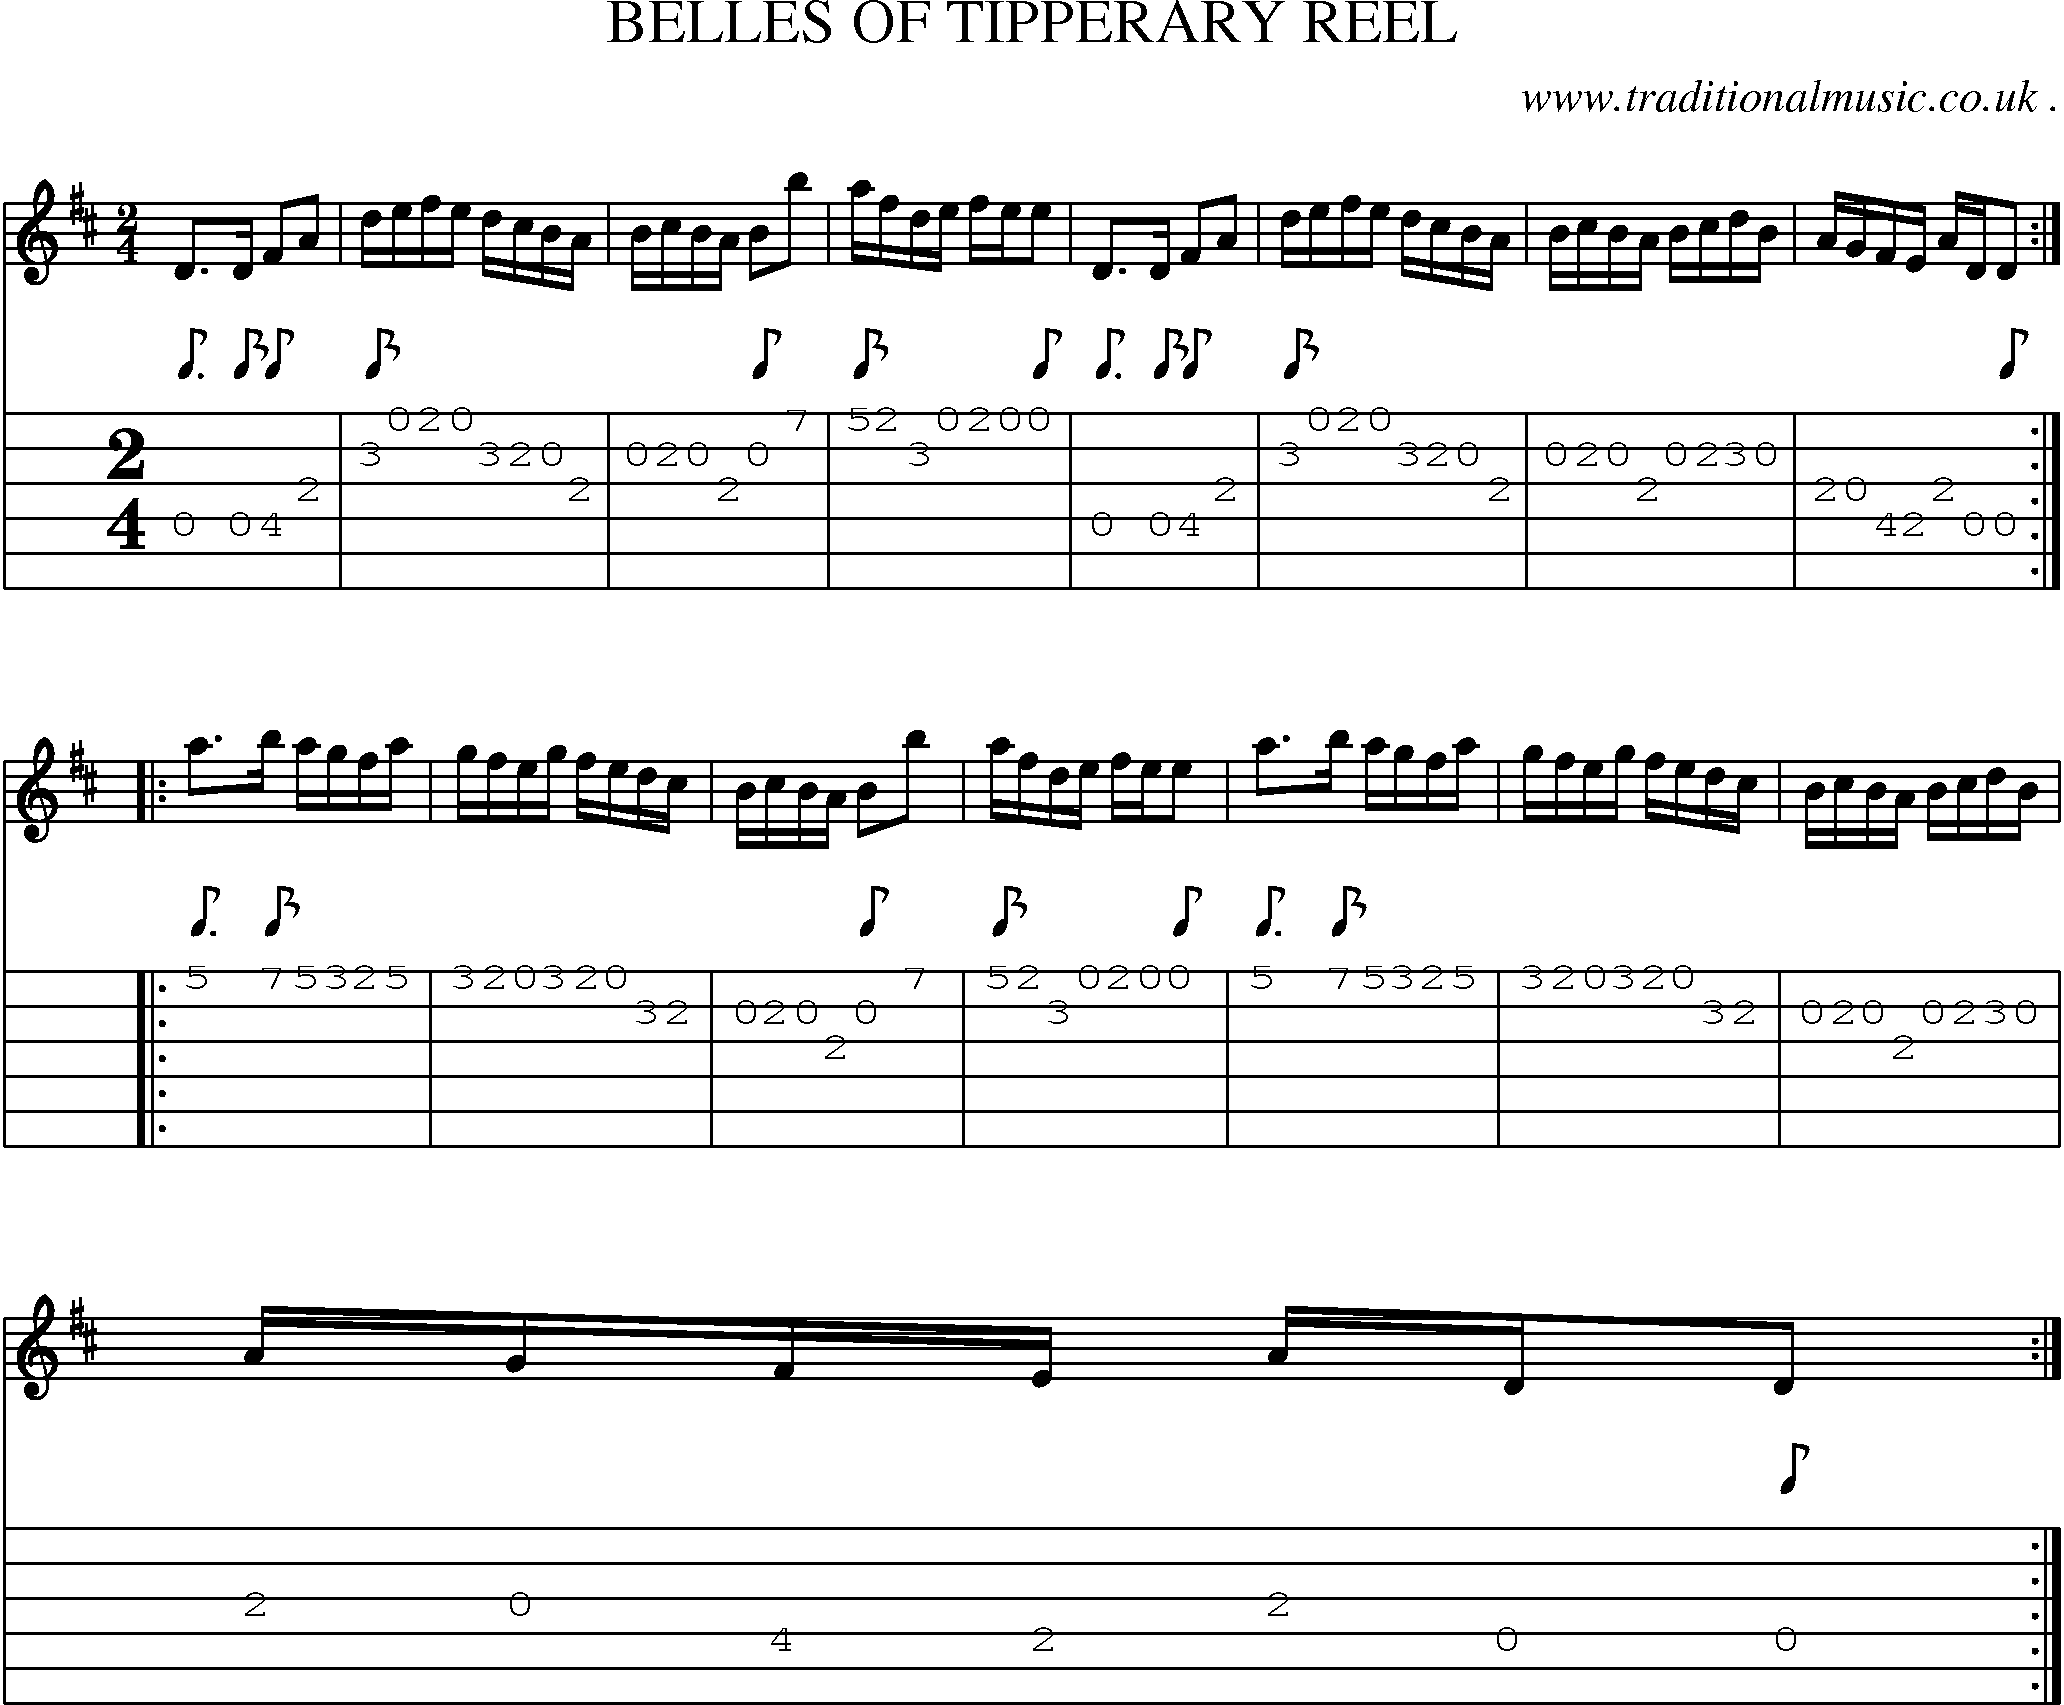 Sheet-Music and Guitar Tabs for Belles Of Tipperary Reel